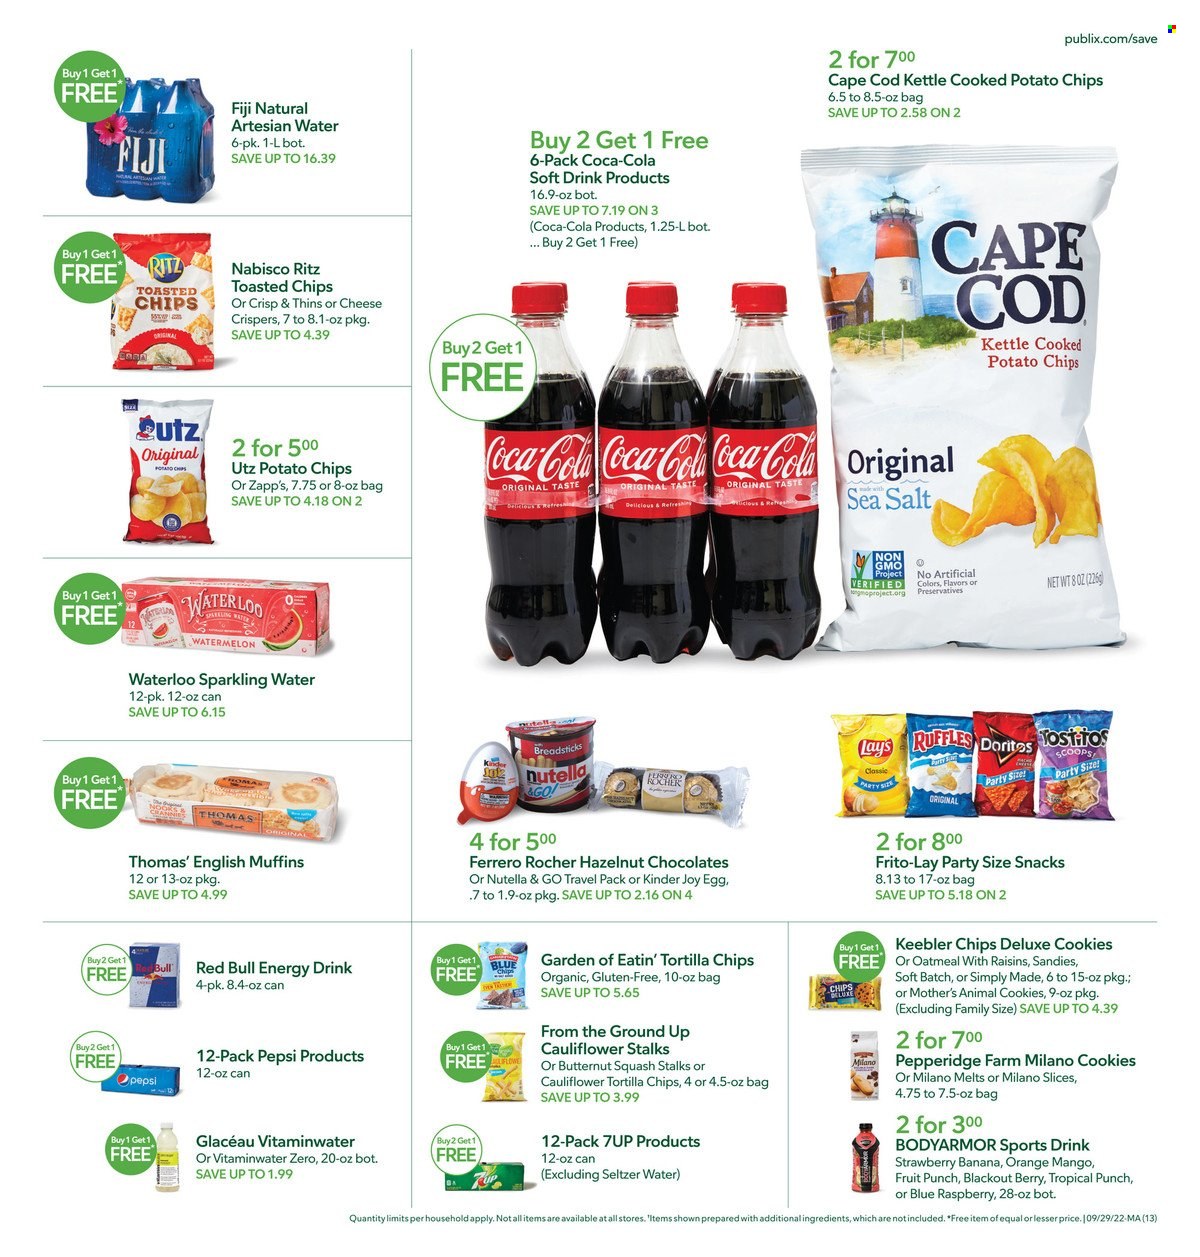 thumbnail - Publix Flyer - 09/29/2022 - 10/05/2022 - Sales products - english muffins, watermelon, oranges, cod, eggs, cookies, Nutella, chocolate, snack, Ferrero Rocher, Kinder Joy, Keebler, RITZ, bread sticks, Doritos, tortilla chips, potato chips, chips, Lay’s, Thins, Frito-Lay, Ruffles, Tostitos, oatmeal, raisins, dried fruit, Coca-Cola, Pepsi, energy drink, soft drink, 7UP, Red Bull, fruit punch, seltzer water, sparkling water, Go!, butternut squash. Page 17.